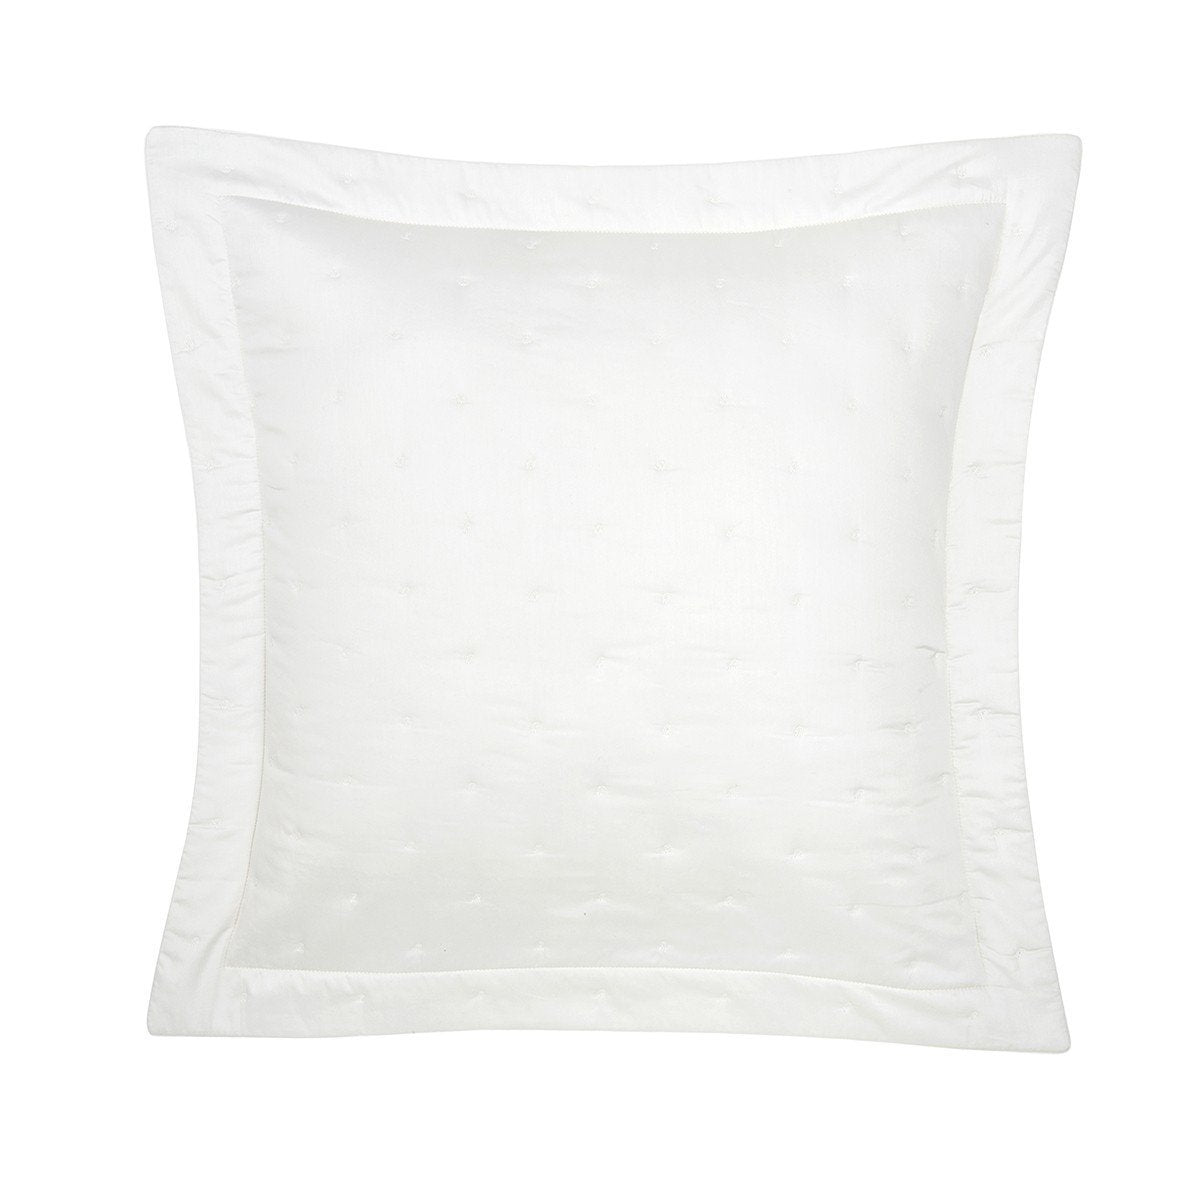 Triomphe Nacre Ivory Bedding by Yves Delorme | Fig Linens - Quilted Euro Sham